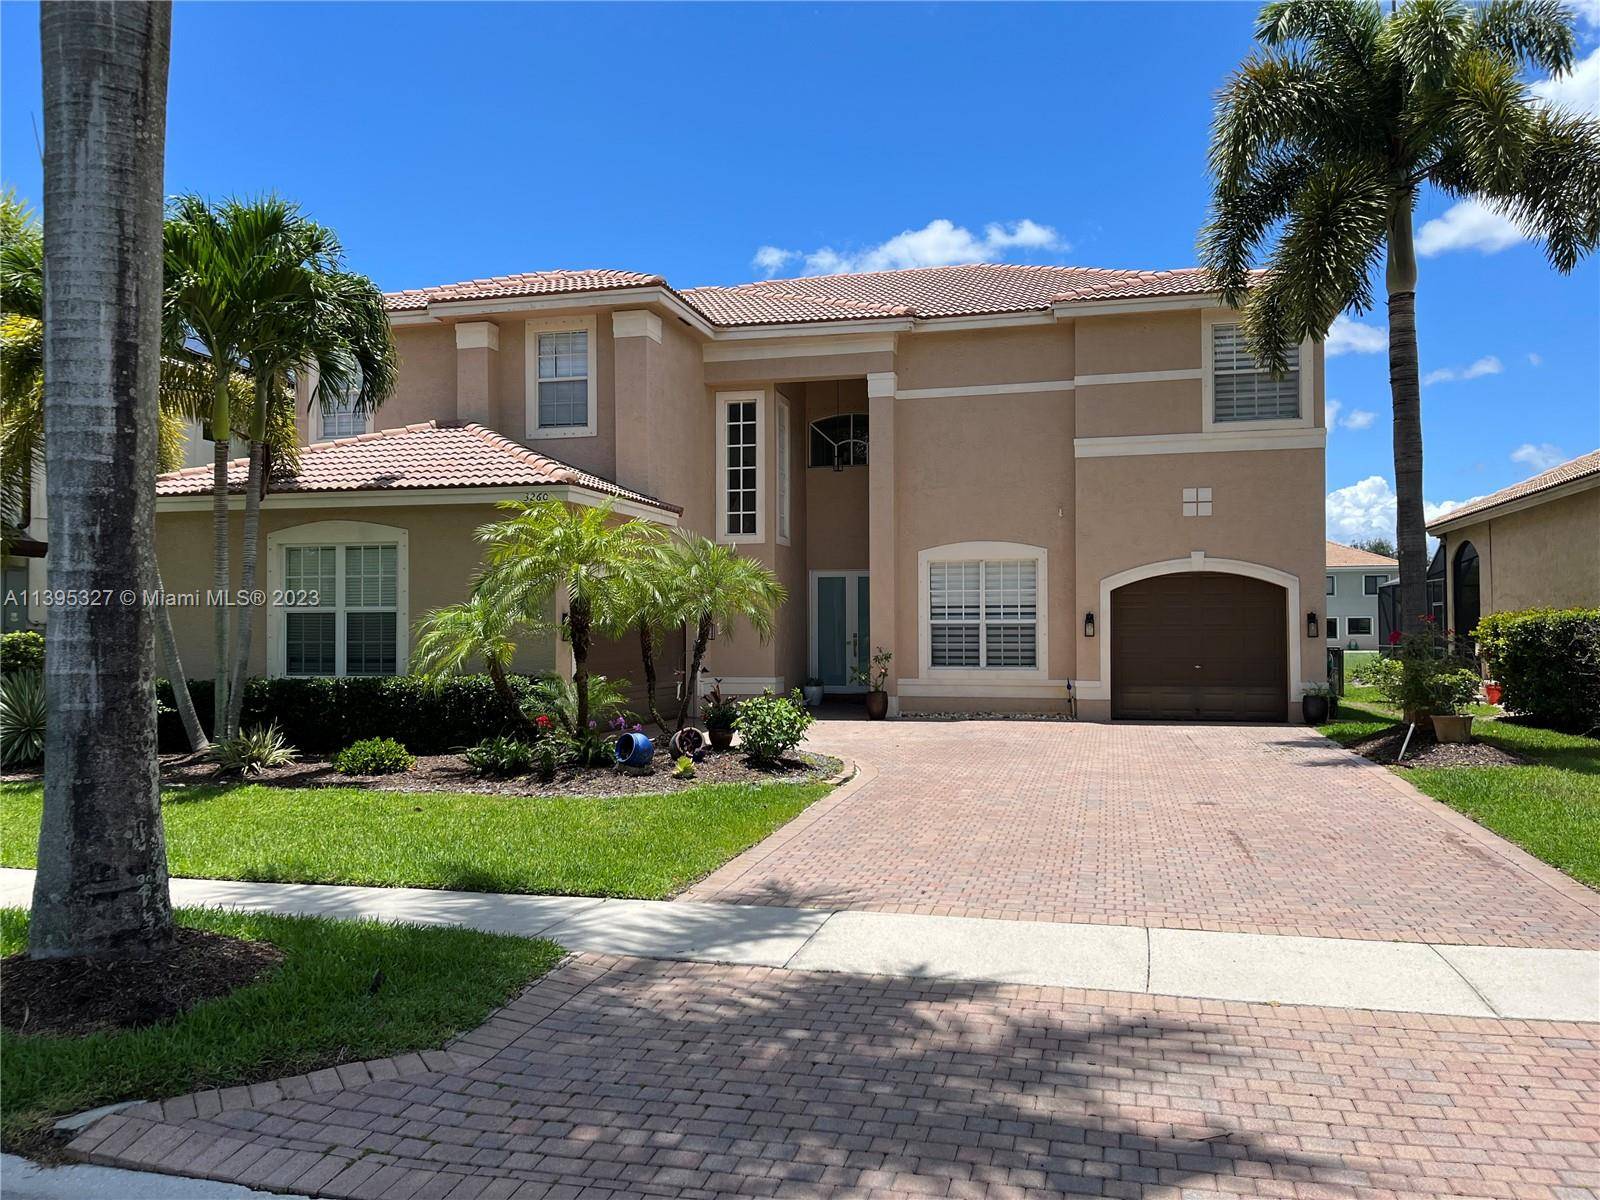 Spectacular waterfront home in exclusive gated community of Sunset Lakes, Vizcaya subdivision.